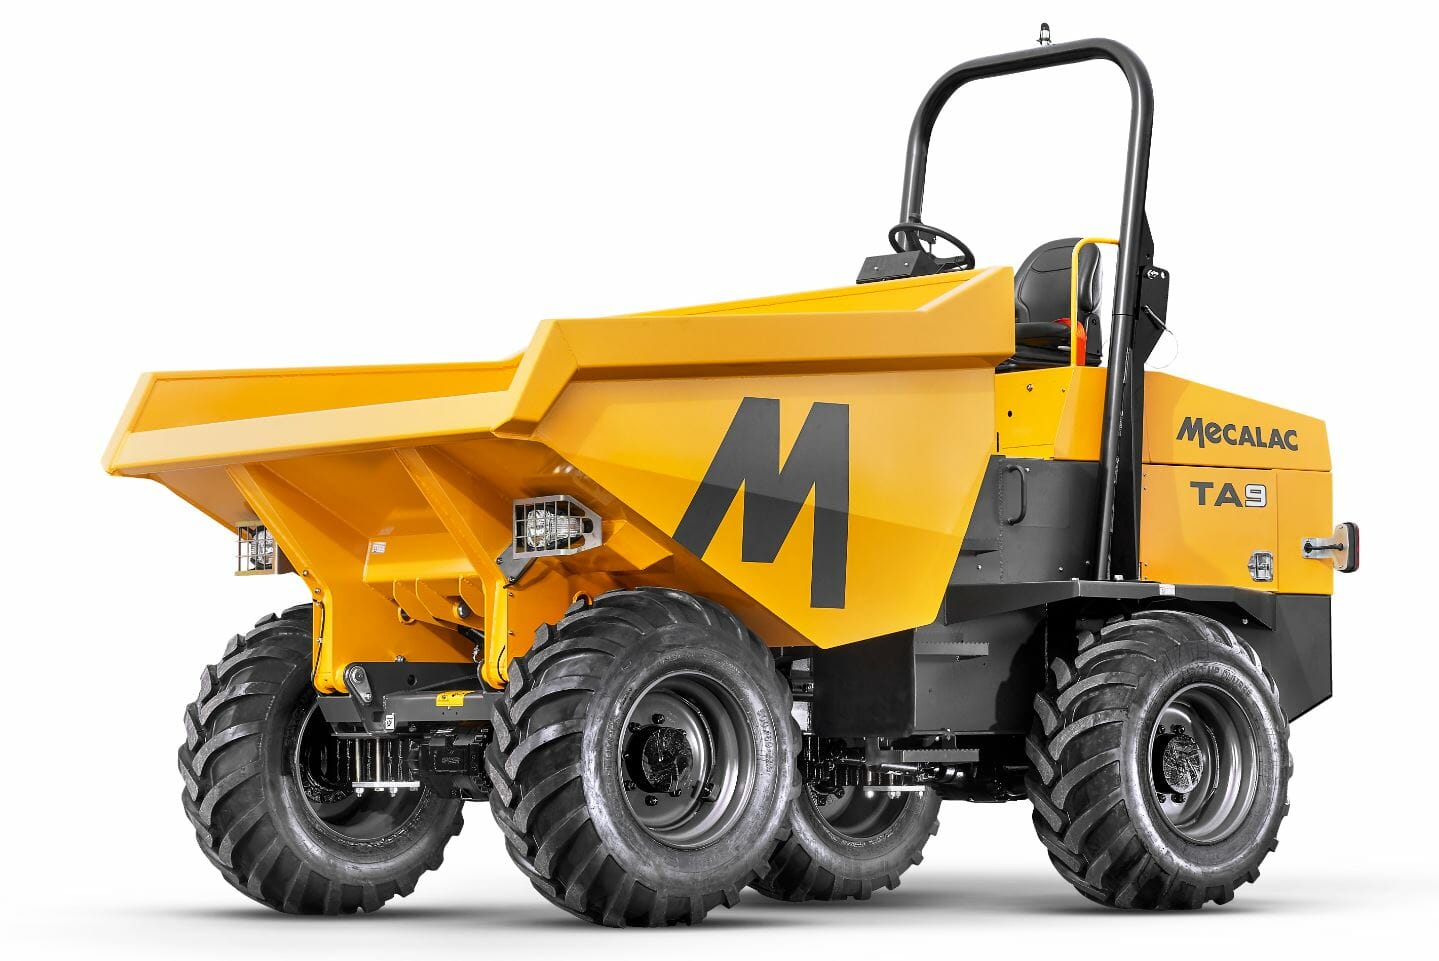 Mecalac UK launches 0% finance on nine-tonne site dumpers